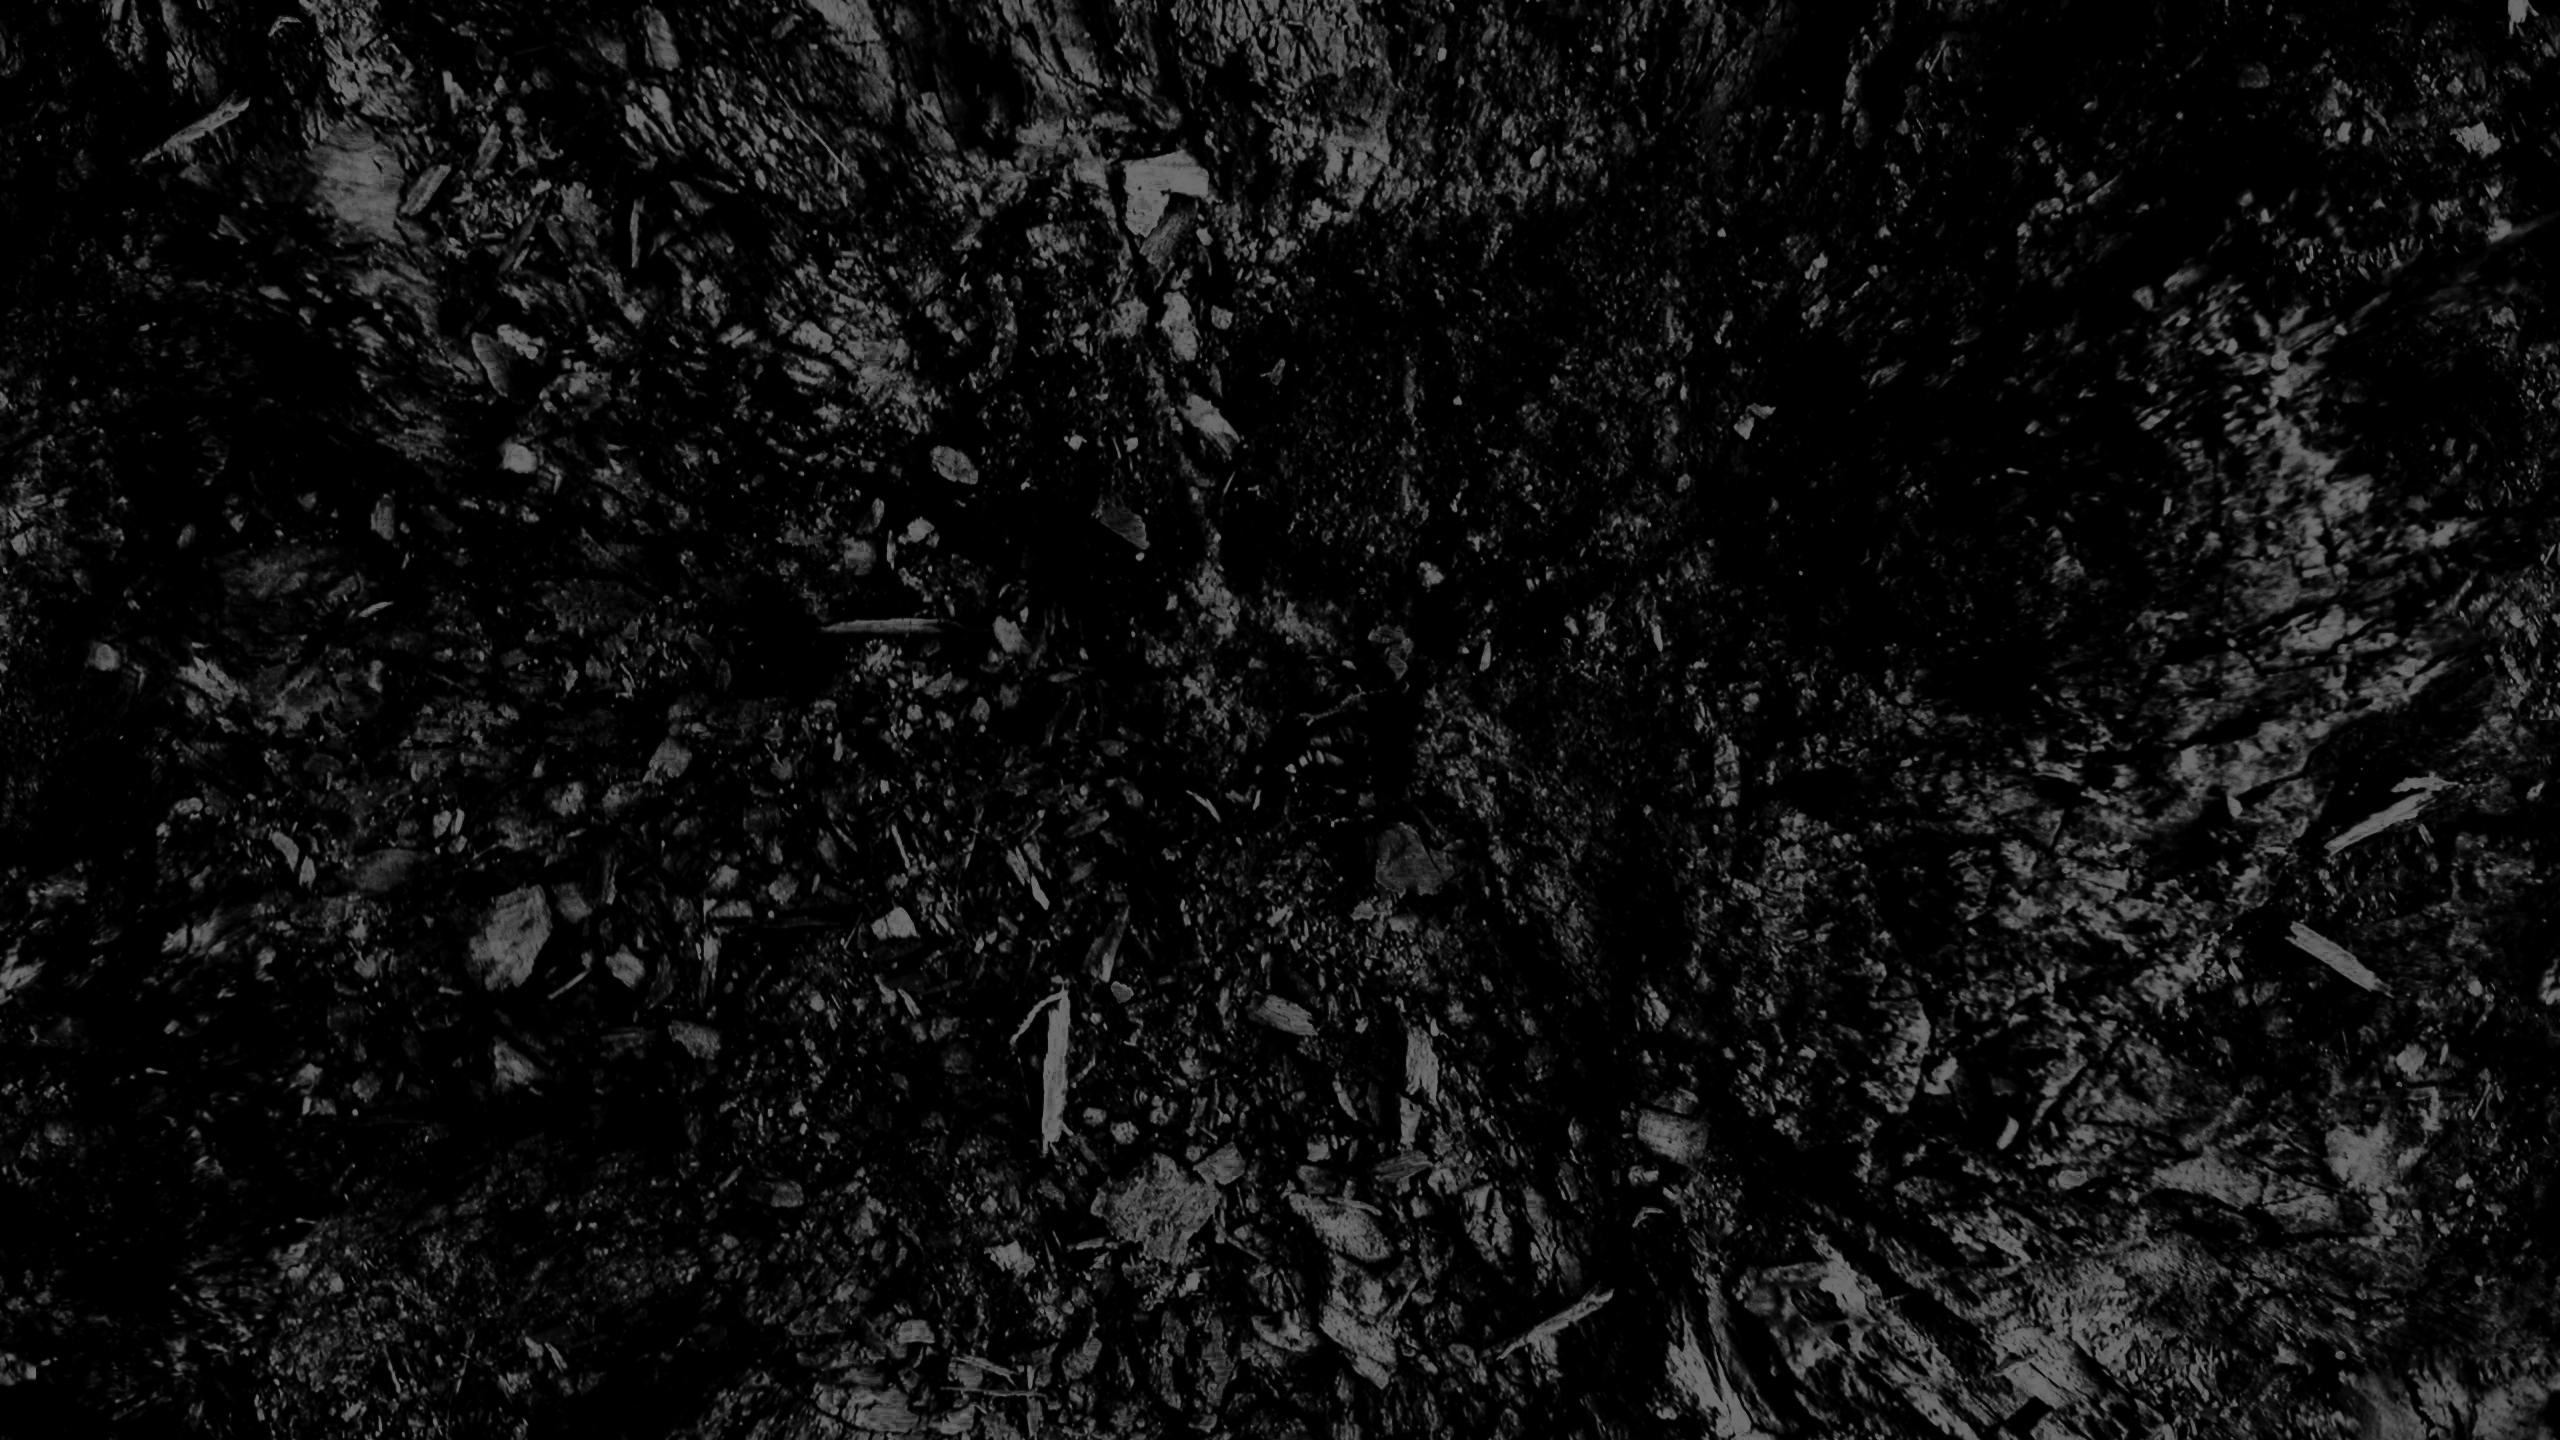 Download wallpaper 2560x1440 dark black and white abstract